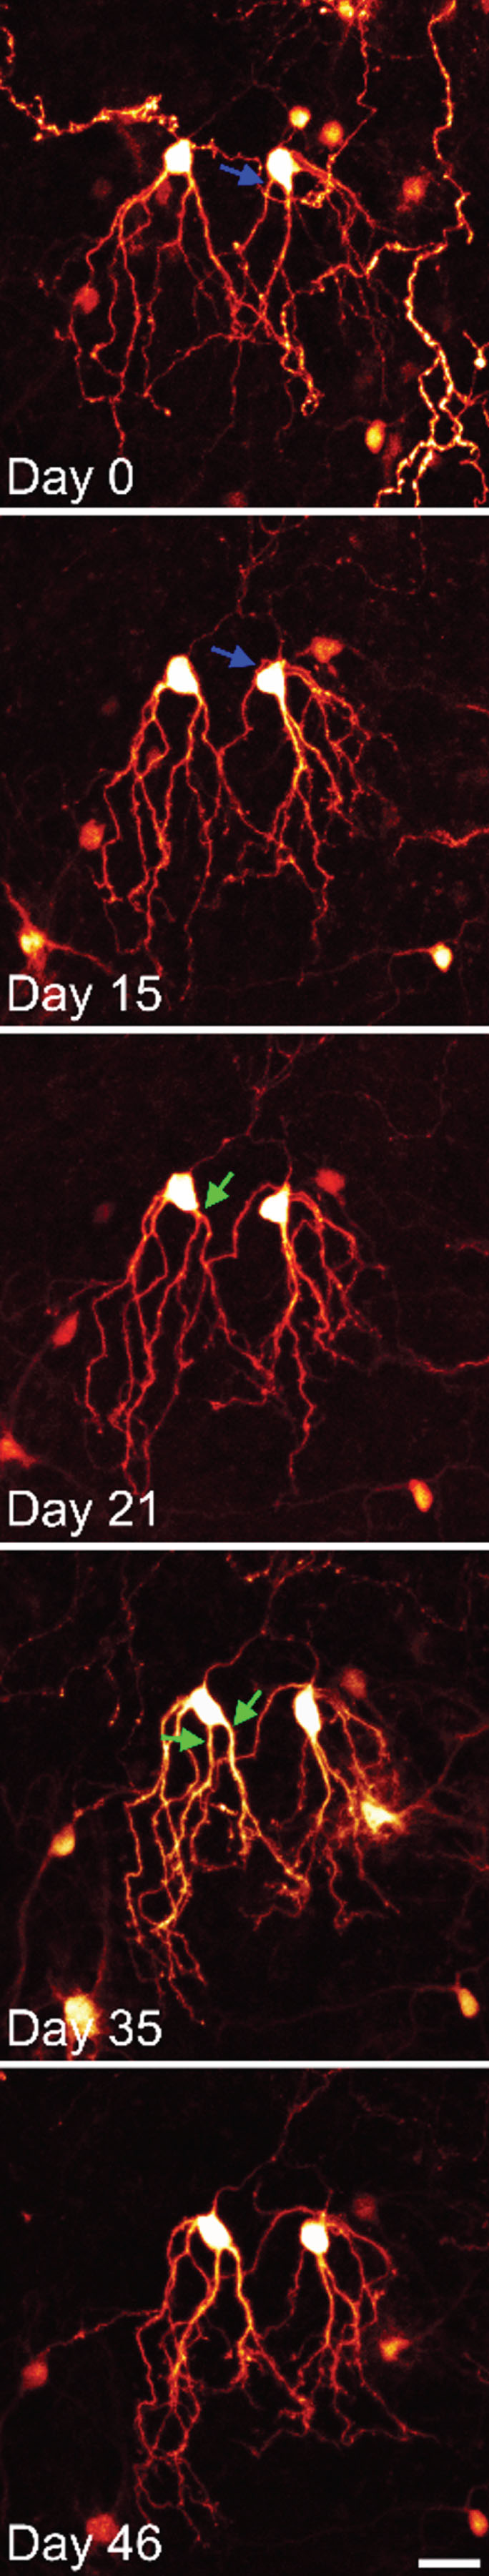 Time series confocal images of YFP-expressing granule cells in an organotypic hippocampal slice culture. The two granule cells shown were imaged over a period of 6 weeks. Both cells show modest somatic translocation, with the soma moving into the apical dendrites. In both cases, this distorts the apical dendritic tree. The blue arrow shows an apical dendrite, which is shifted to the basal pole of the cell. The green arrows show the soma absorbing a dendritic branch point, converting a single primary dendrite into two primary dendrites. Scale bar = 20μm.